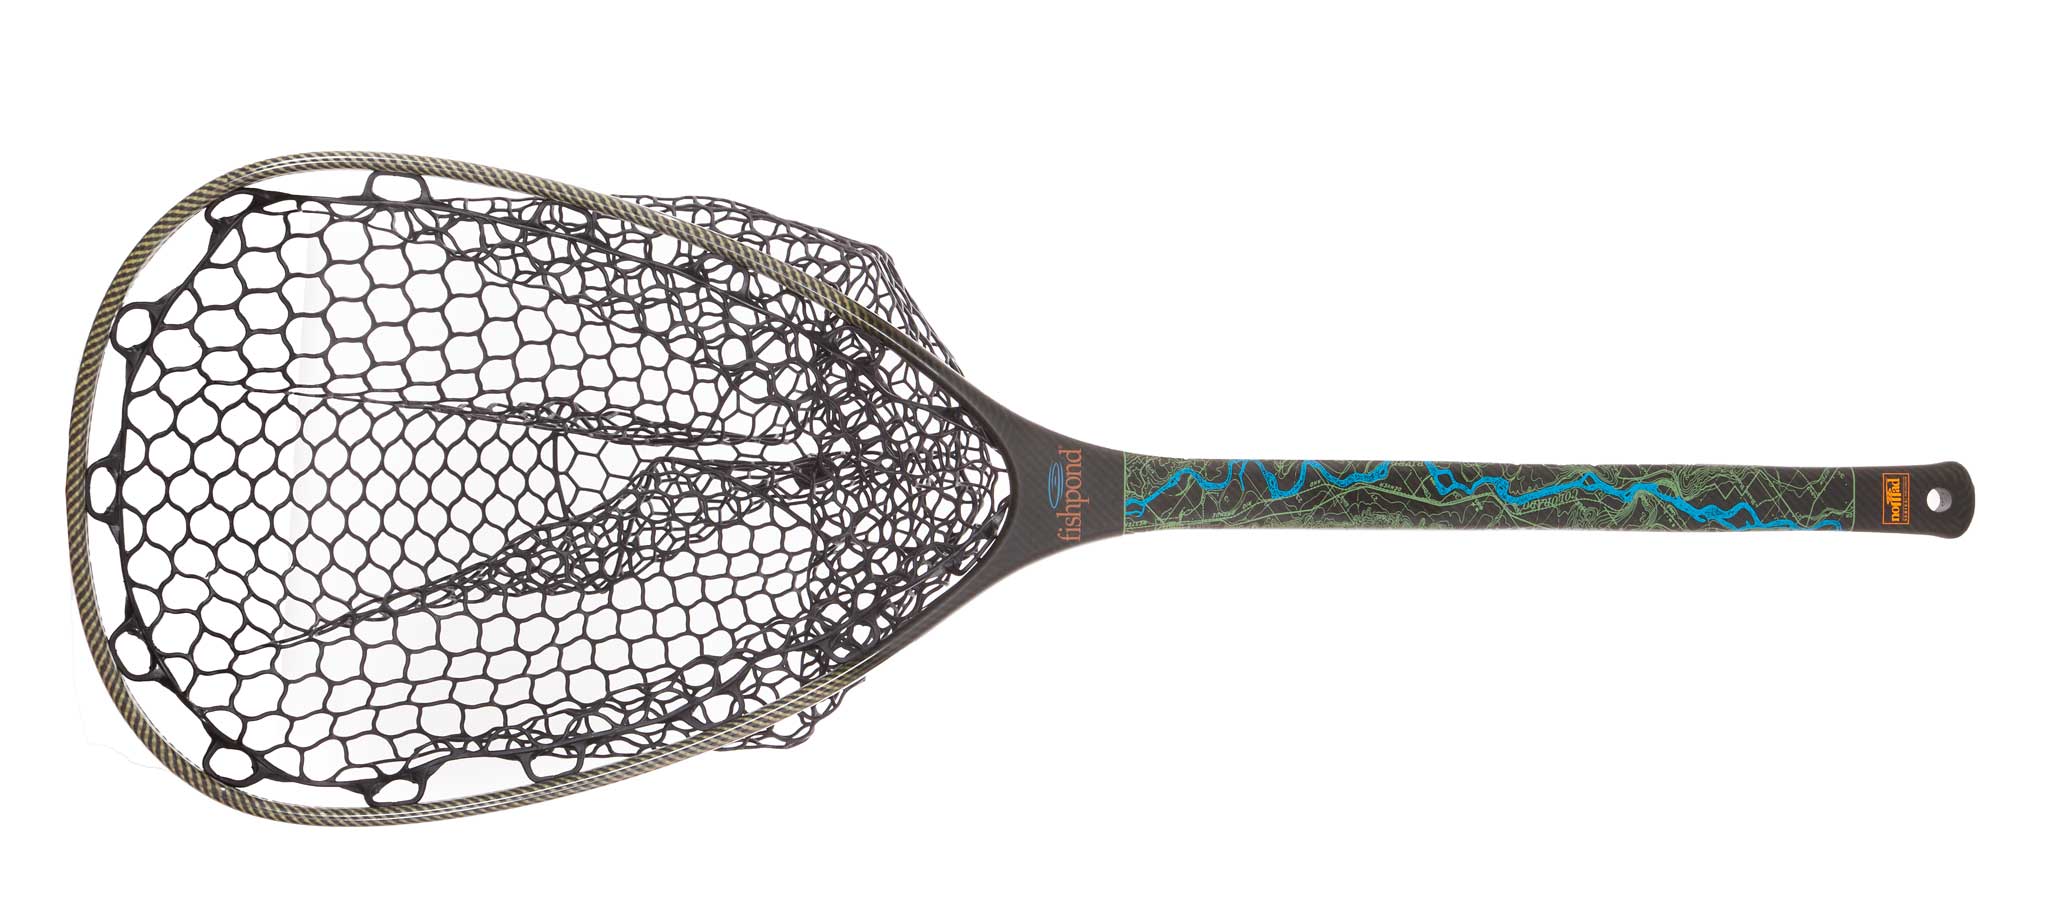 Gear Review: Fishpond Nomad Mid-Length River Armor American Rivers Edition  Net